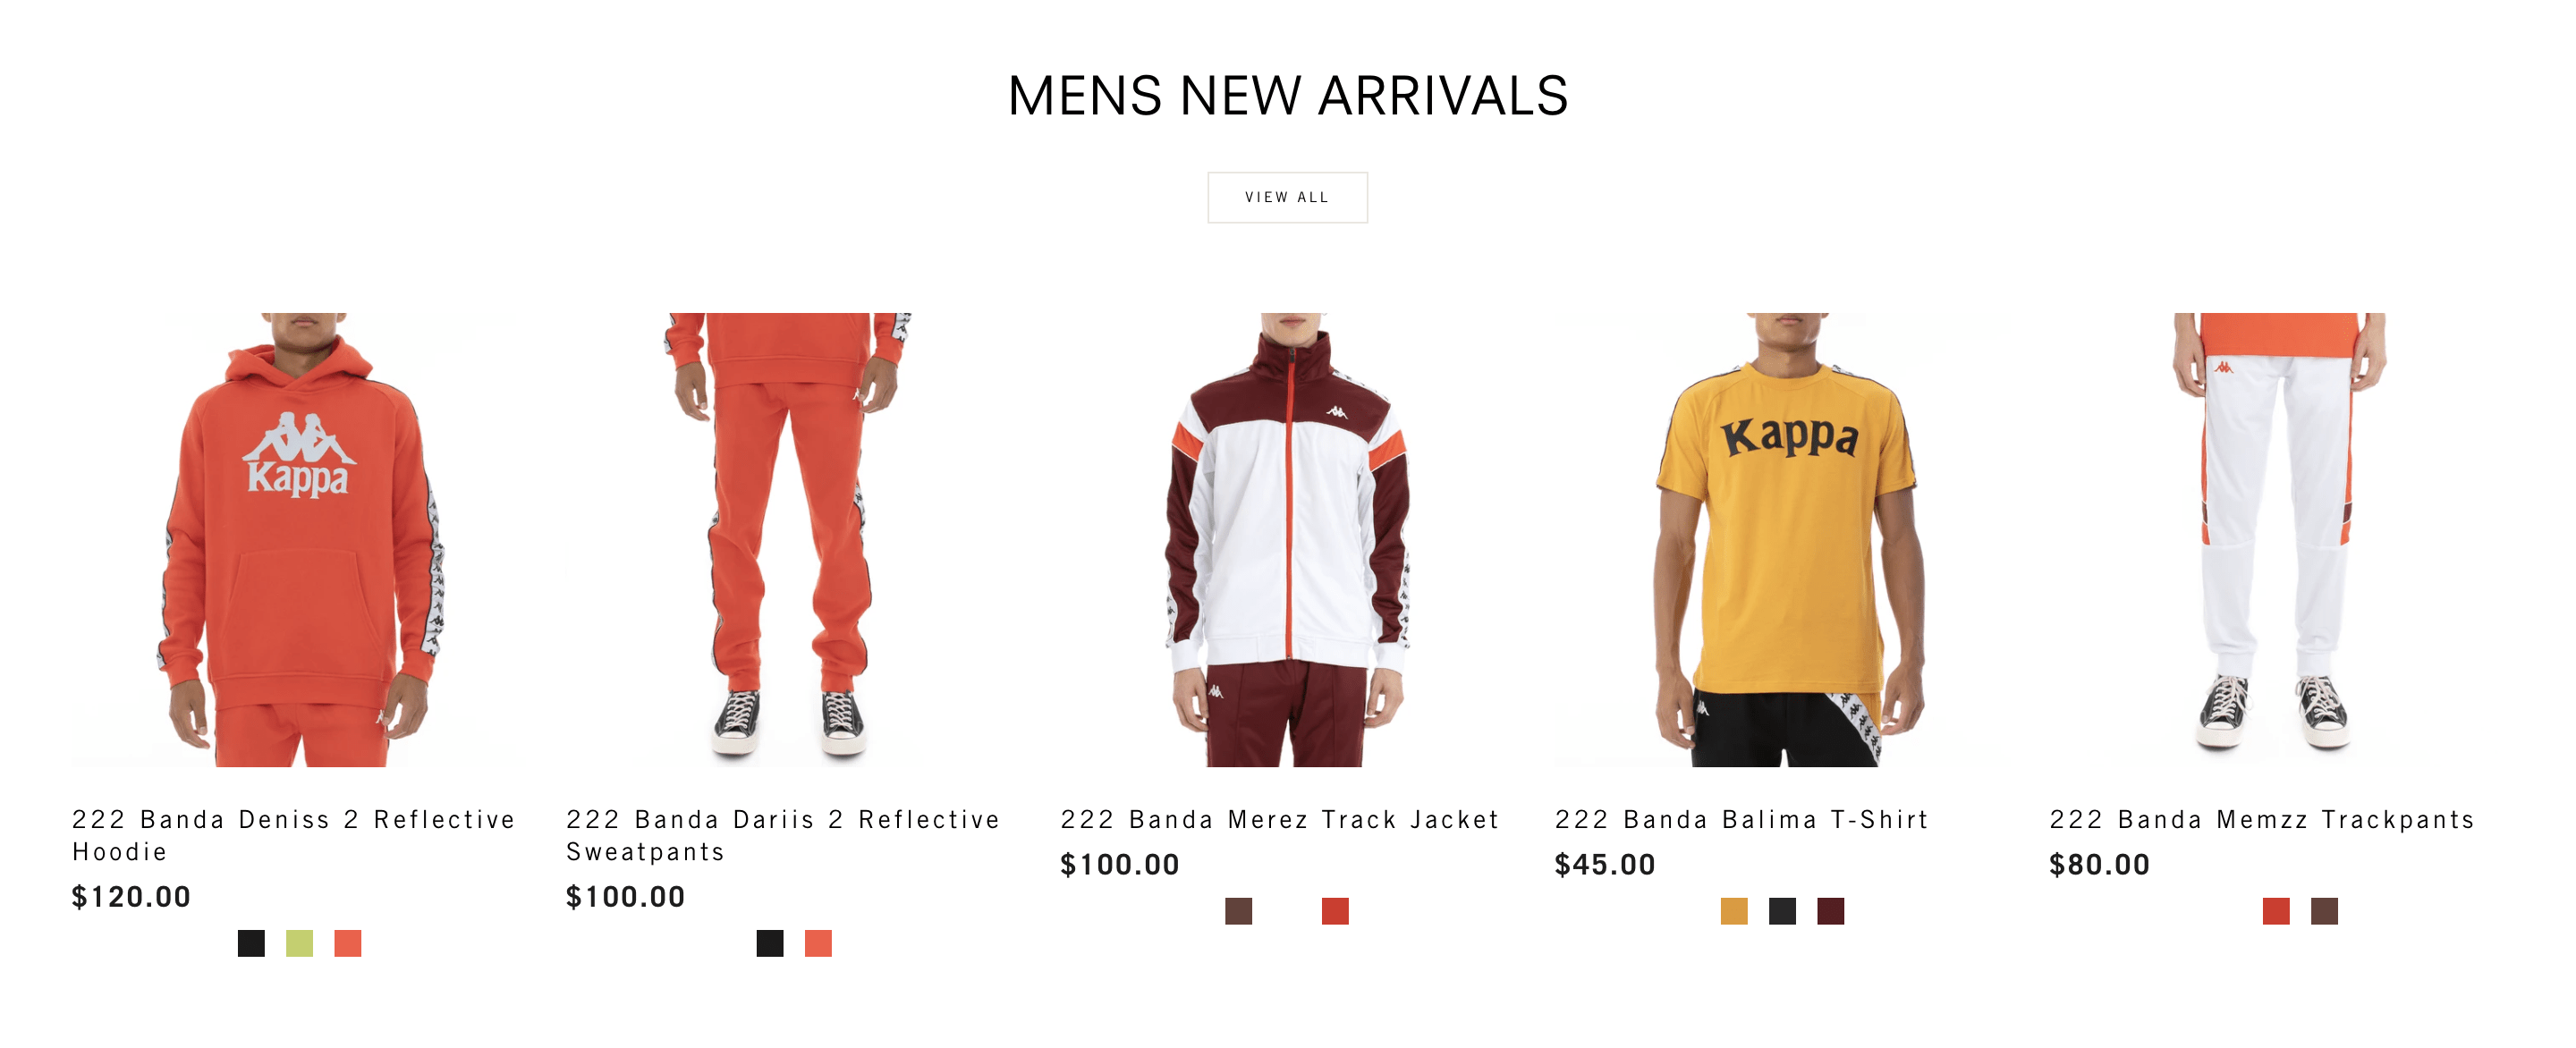 Example of new arrivals in Men's clothing